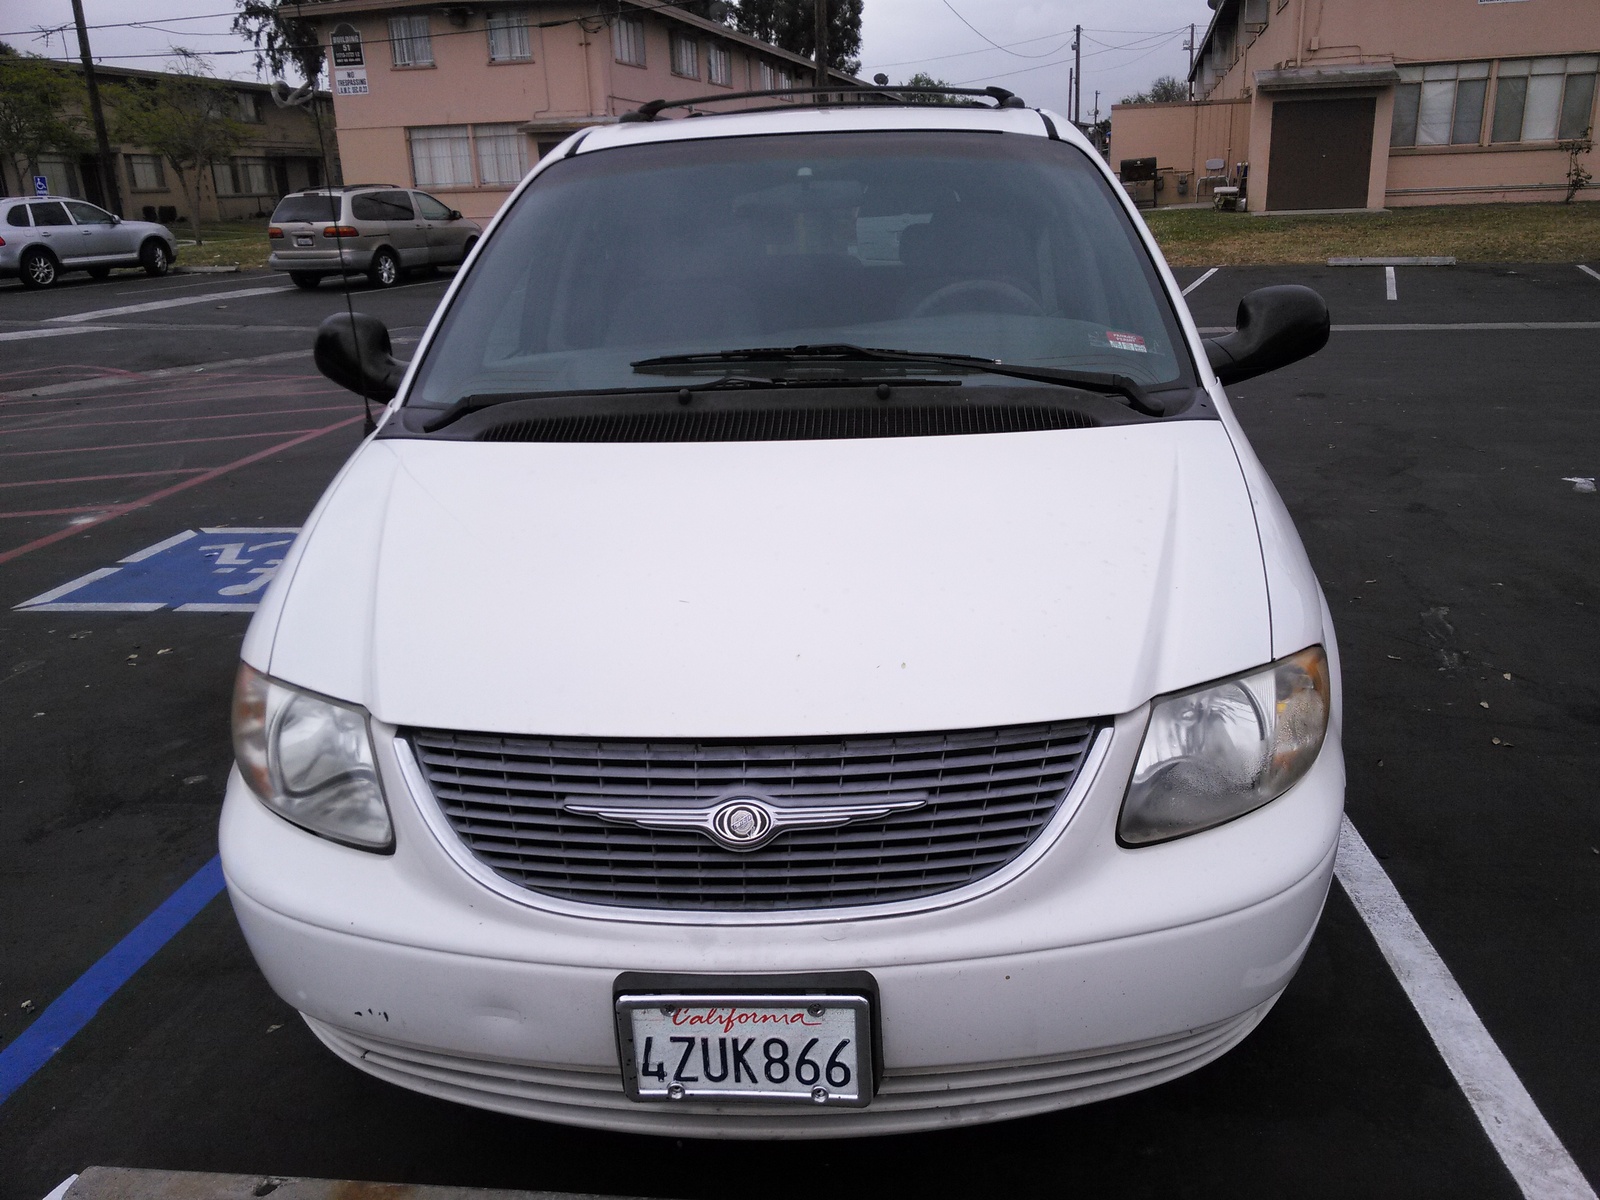 Chrysler town and country vibration #2